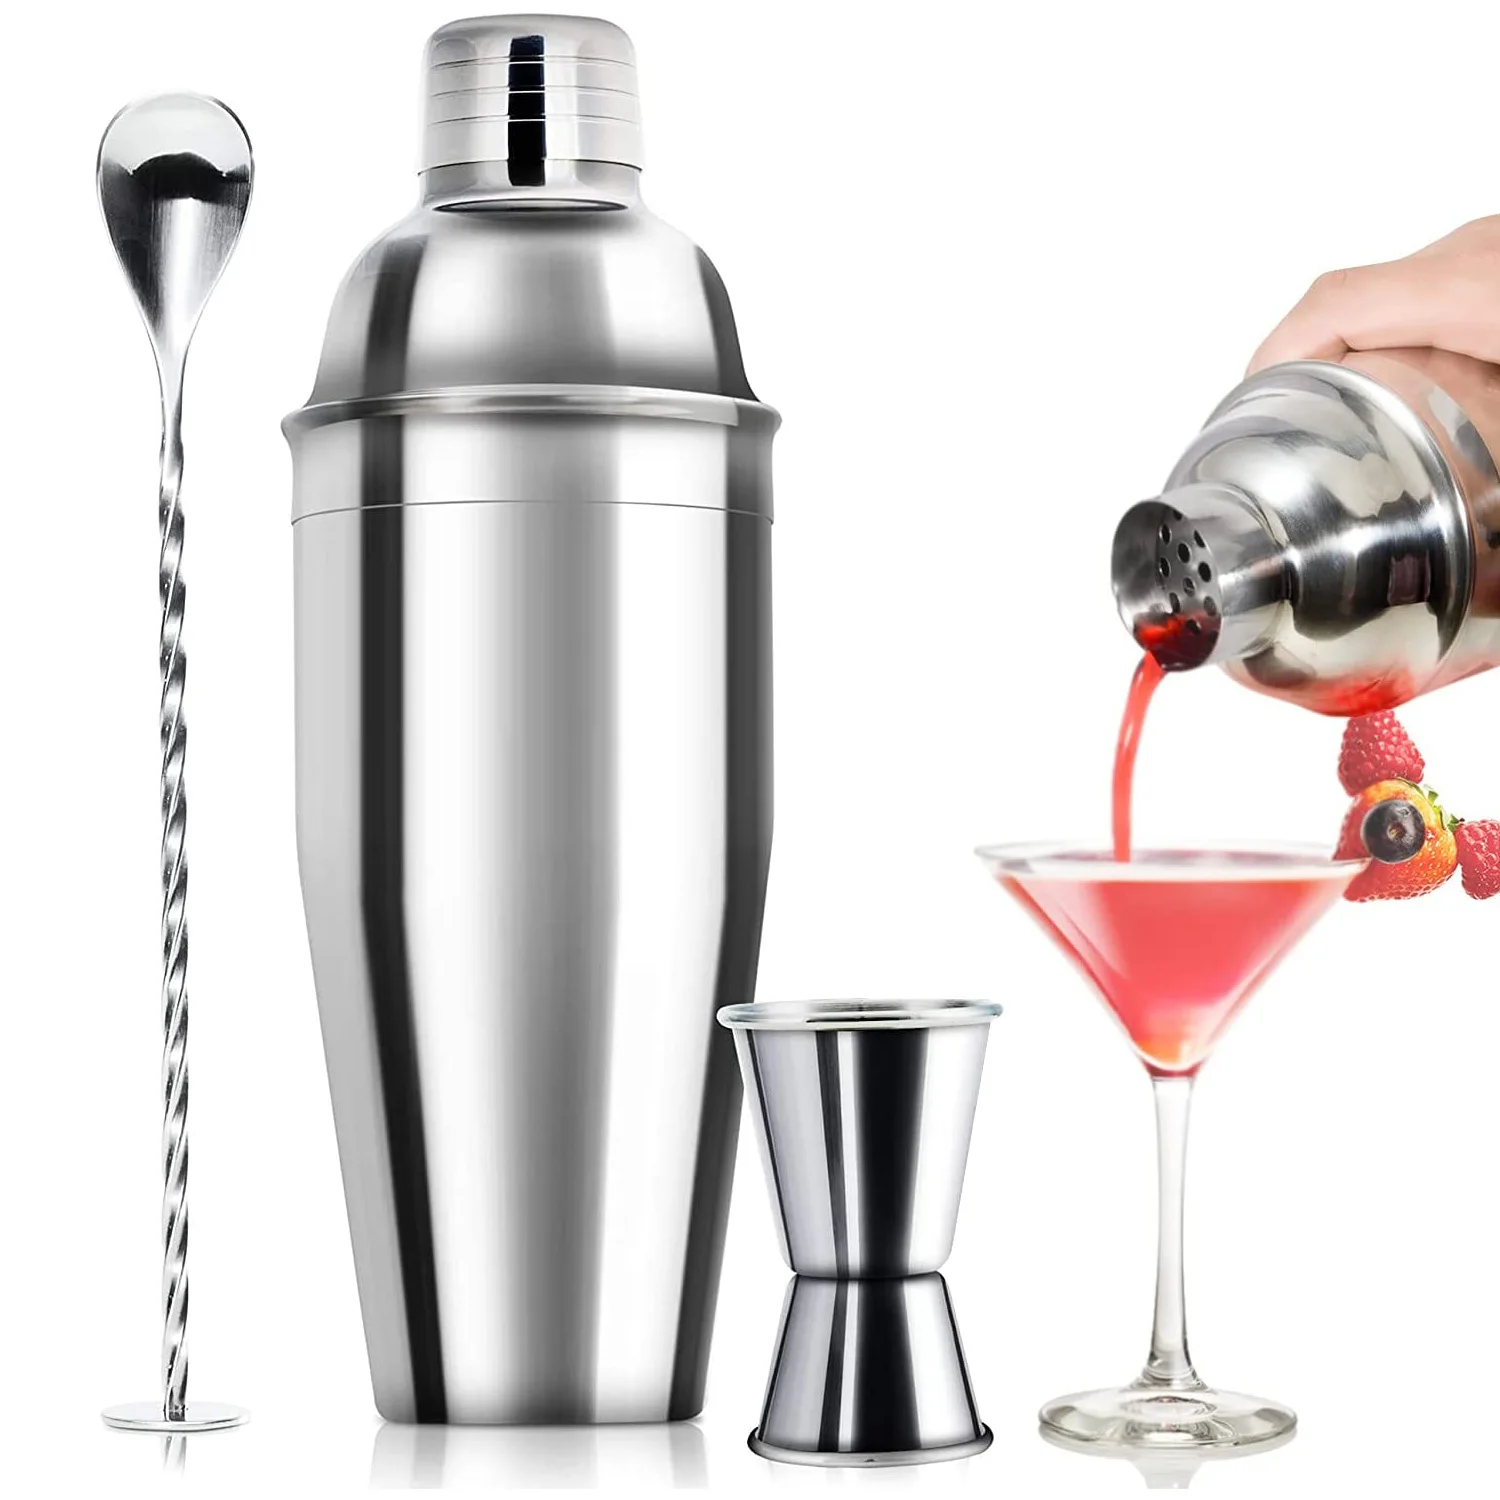 

Customize Premium Maracas Boston Bar Tool Gift Silver Margarita Stainless Steel Measuring Jigger Mixing Cocktail Shaker Set, Customized color acceptable